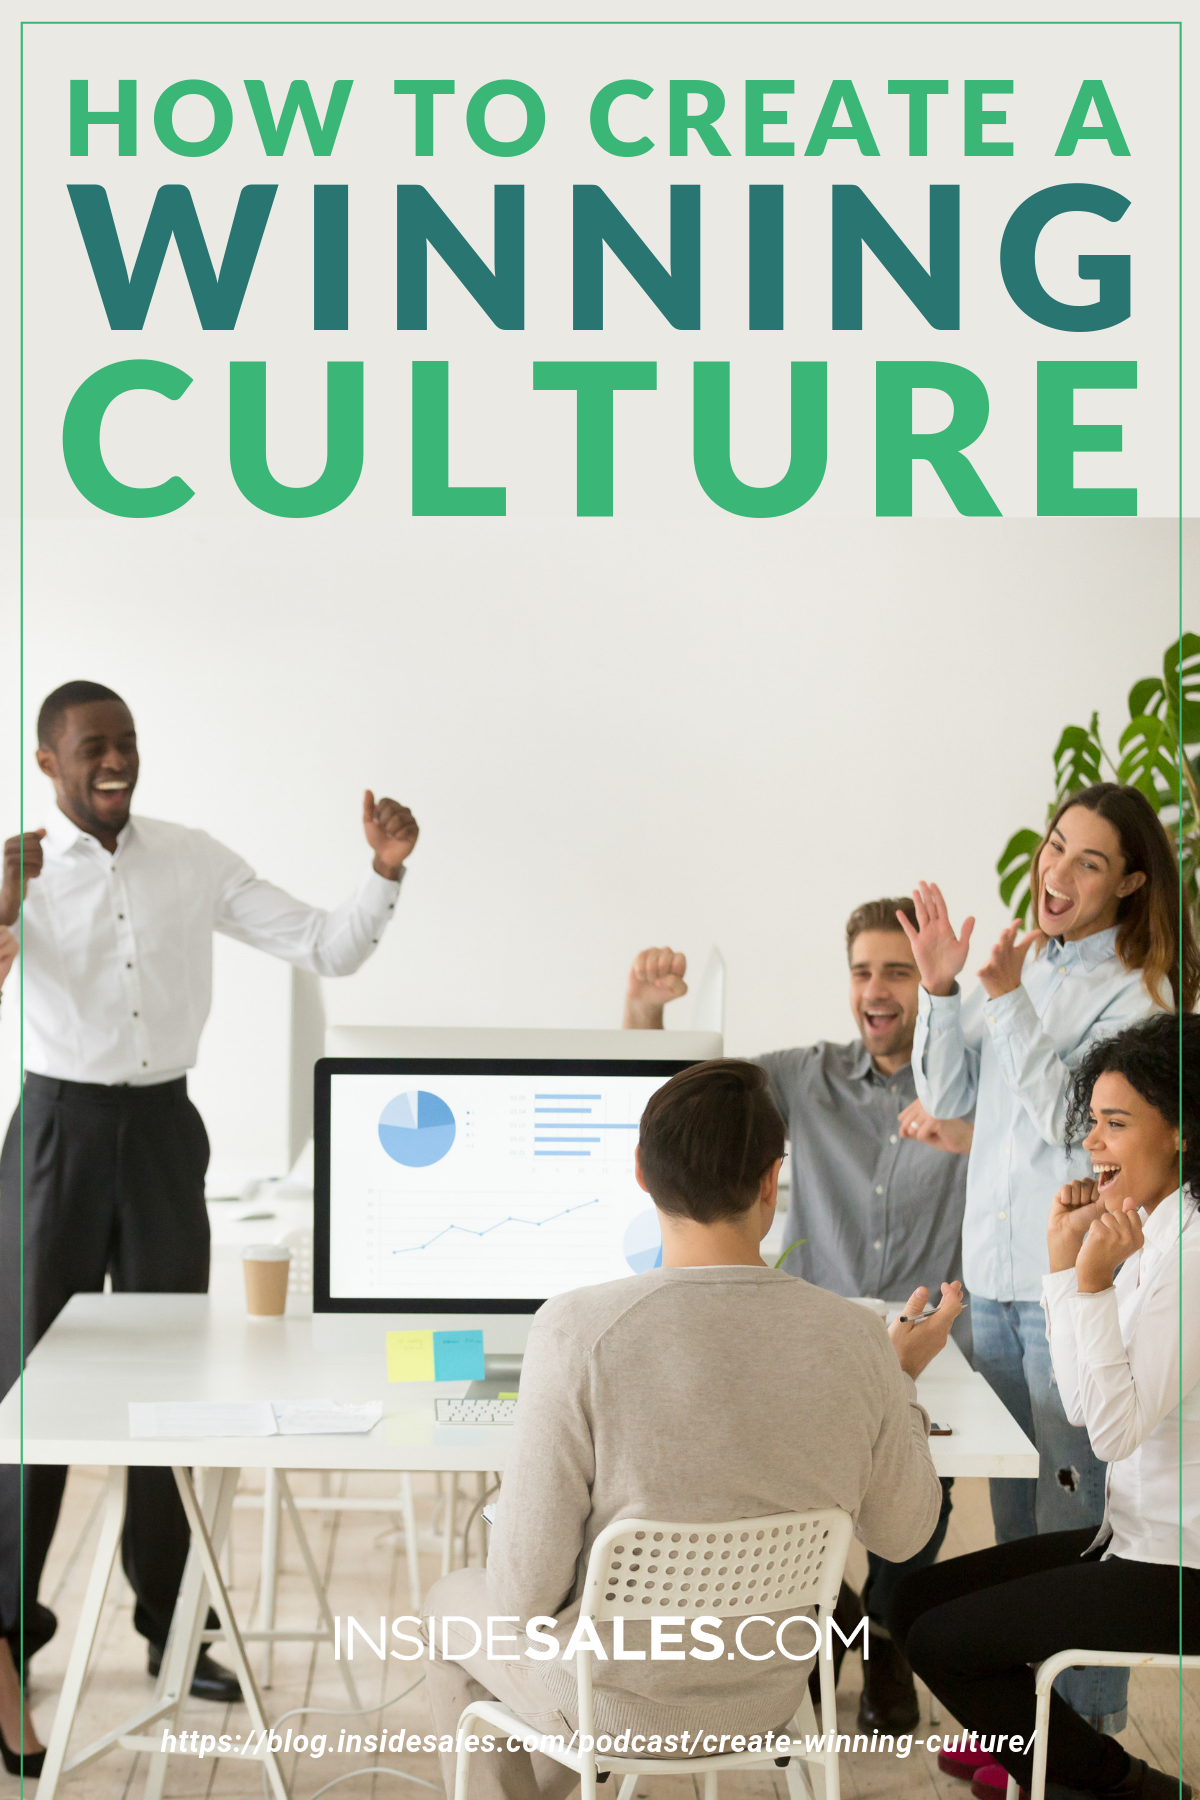 How To Create A Winning Culture https://www.insidesales.com/blog/podcast/create-winning-culture/